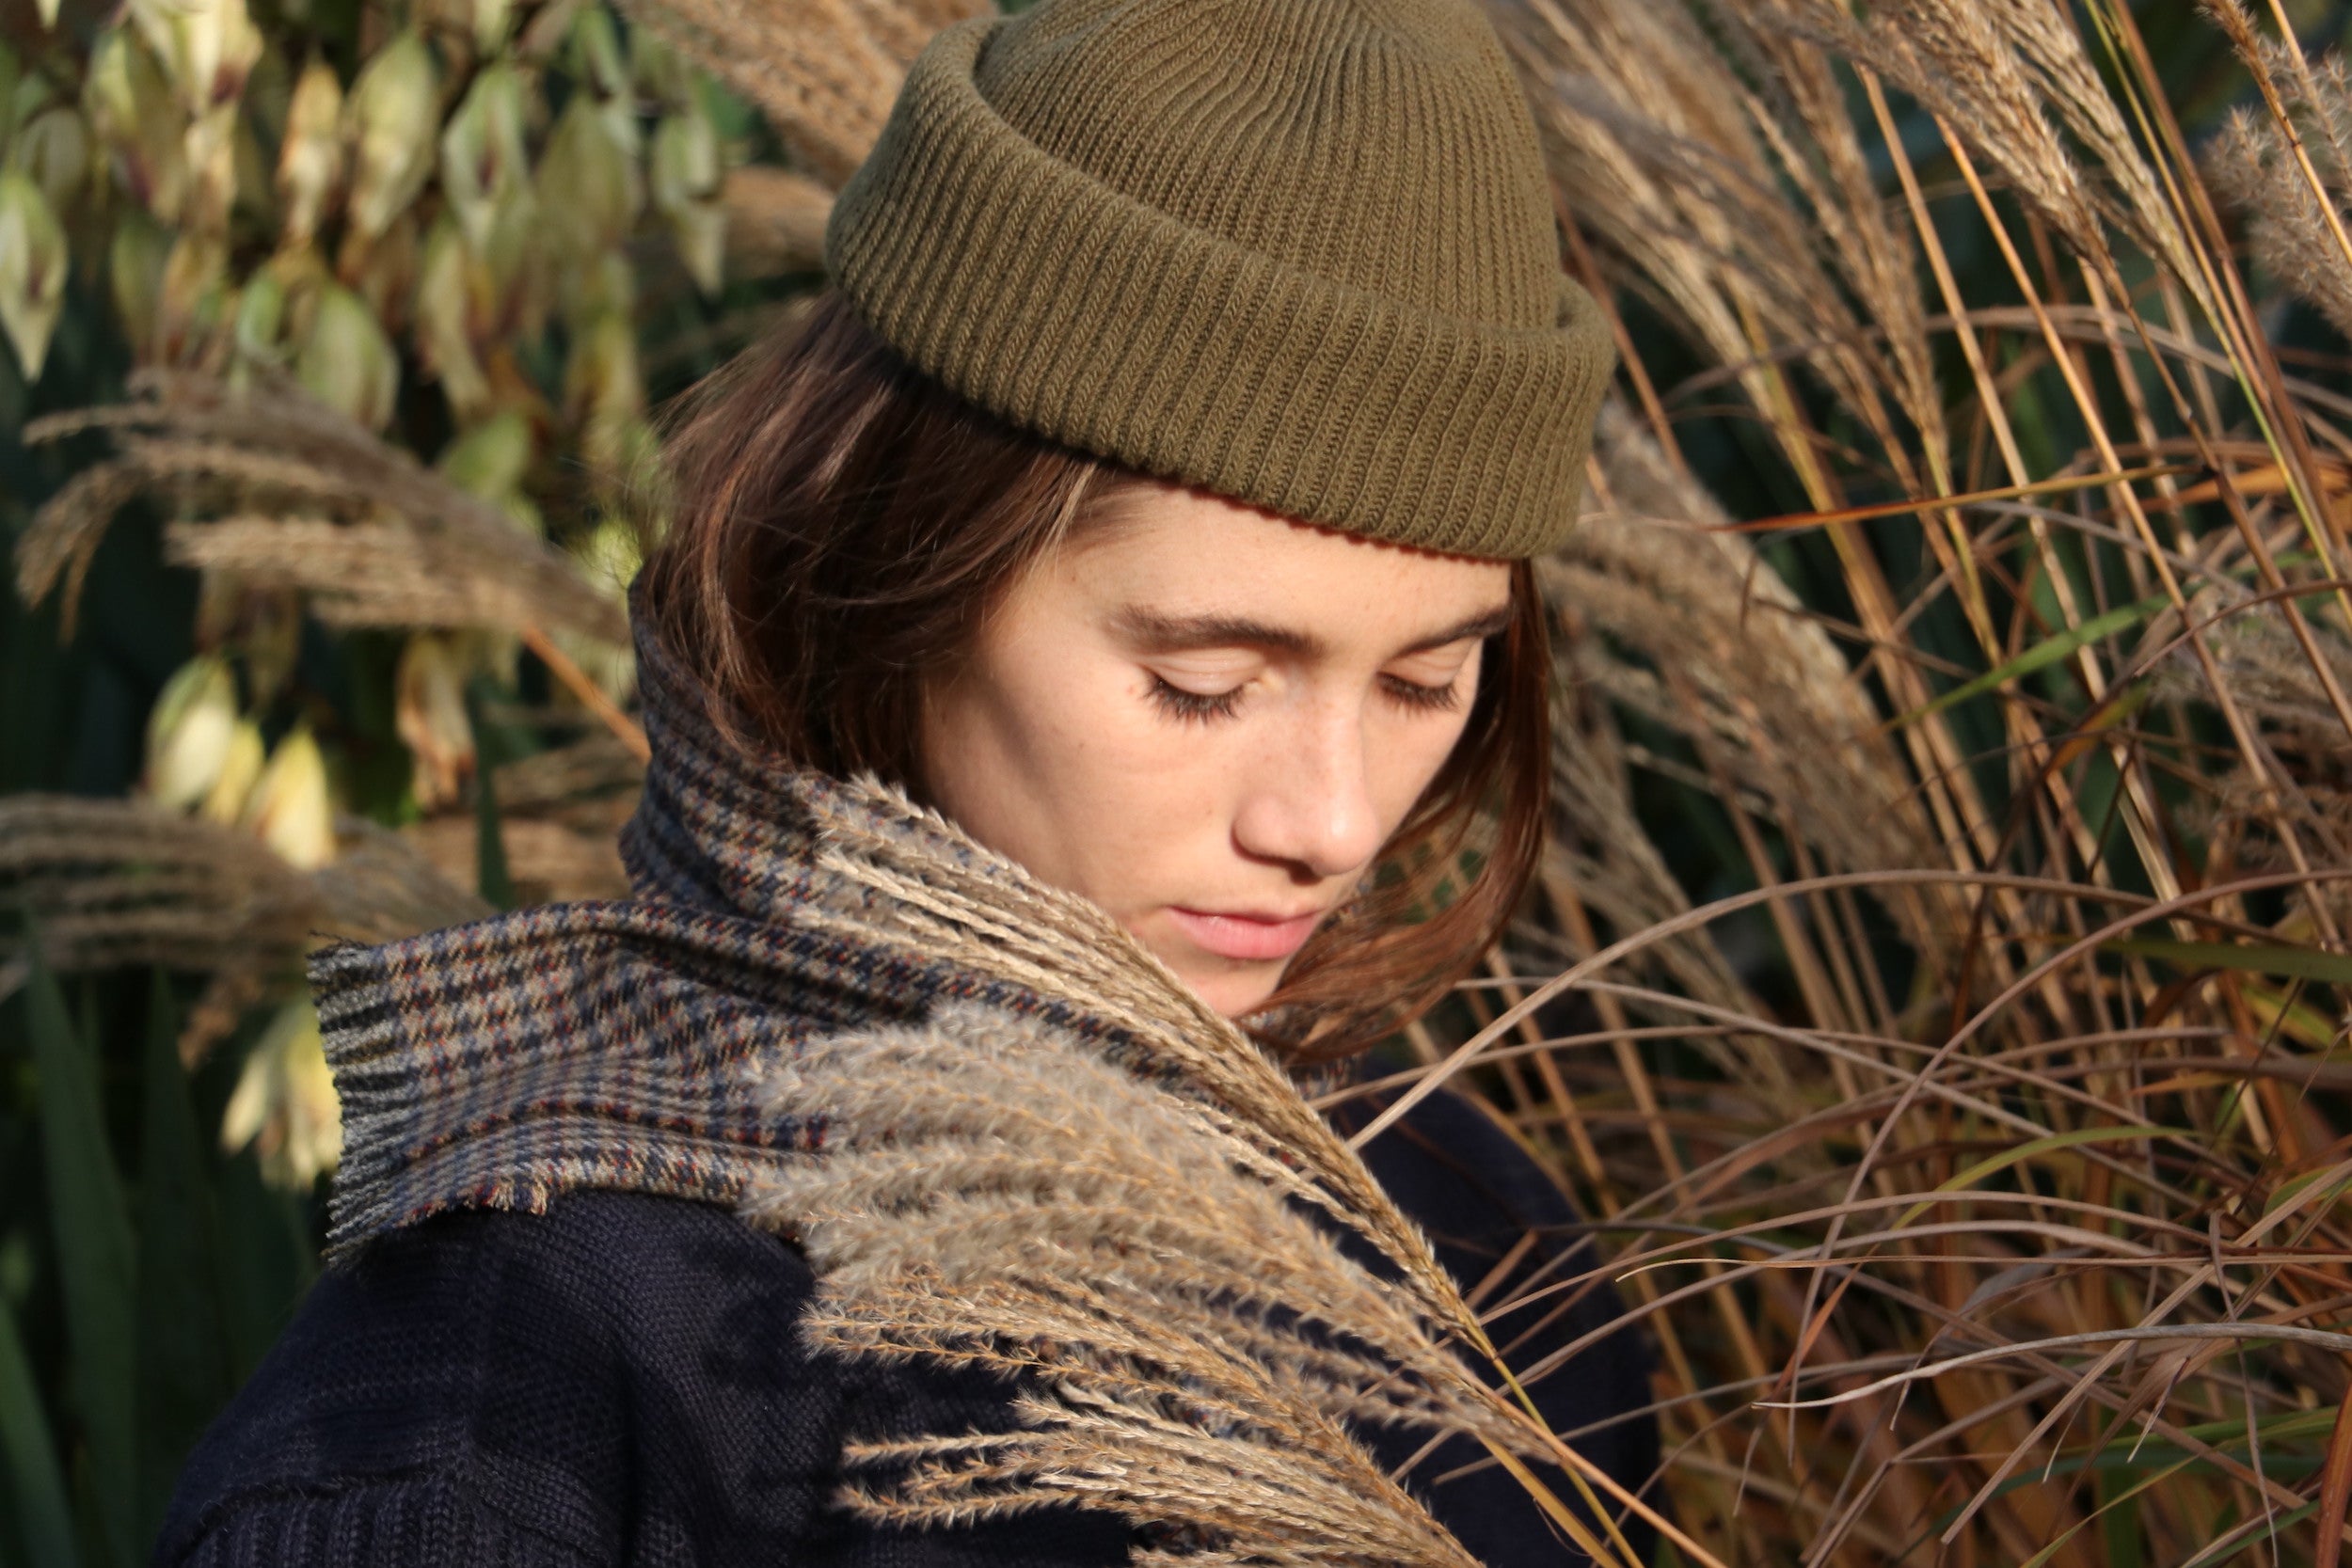 Decca wears Le Tricoteur Premium Guernsey in Navy with Wool Hat in Olive Drab